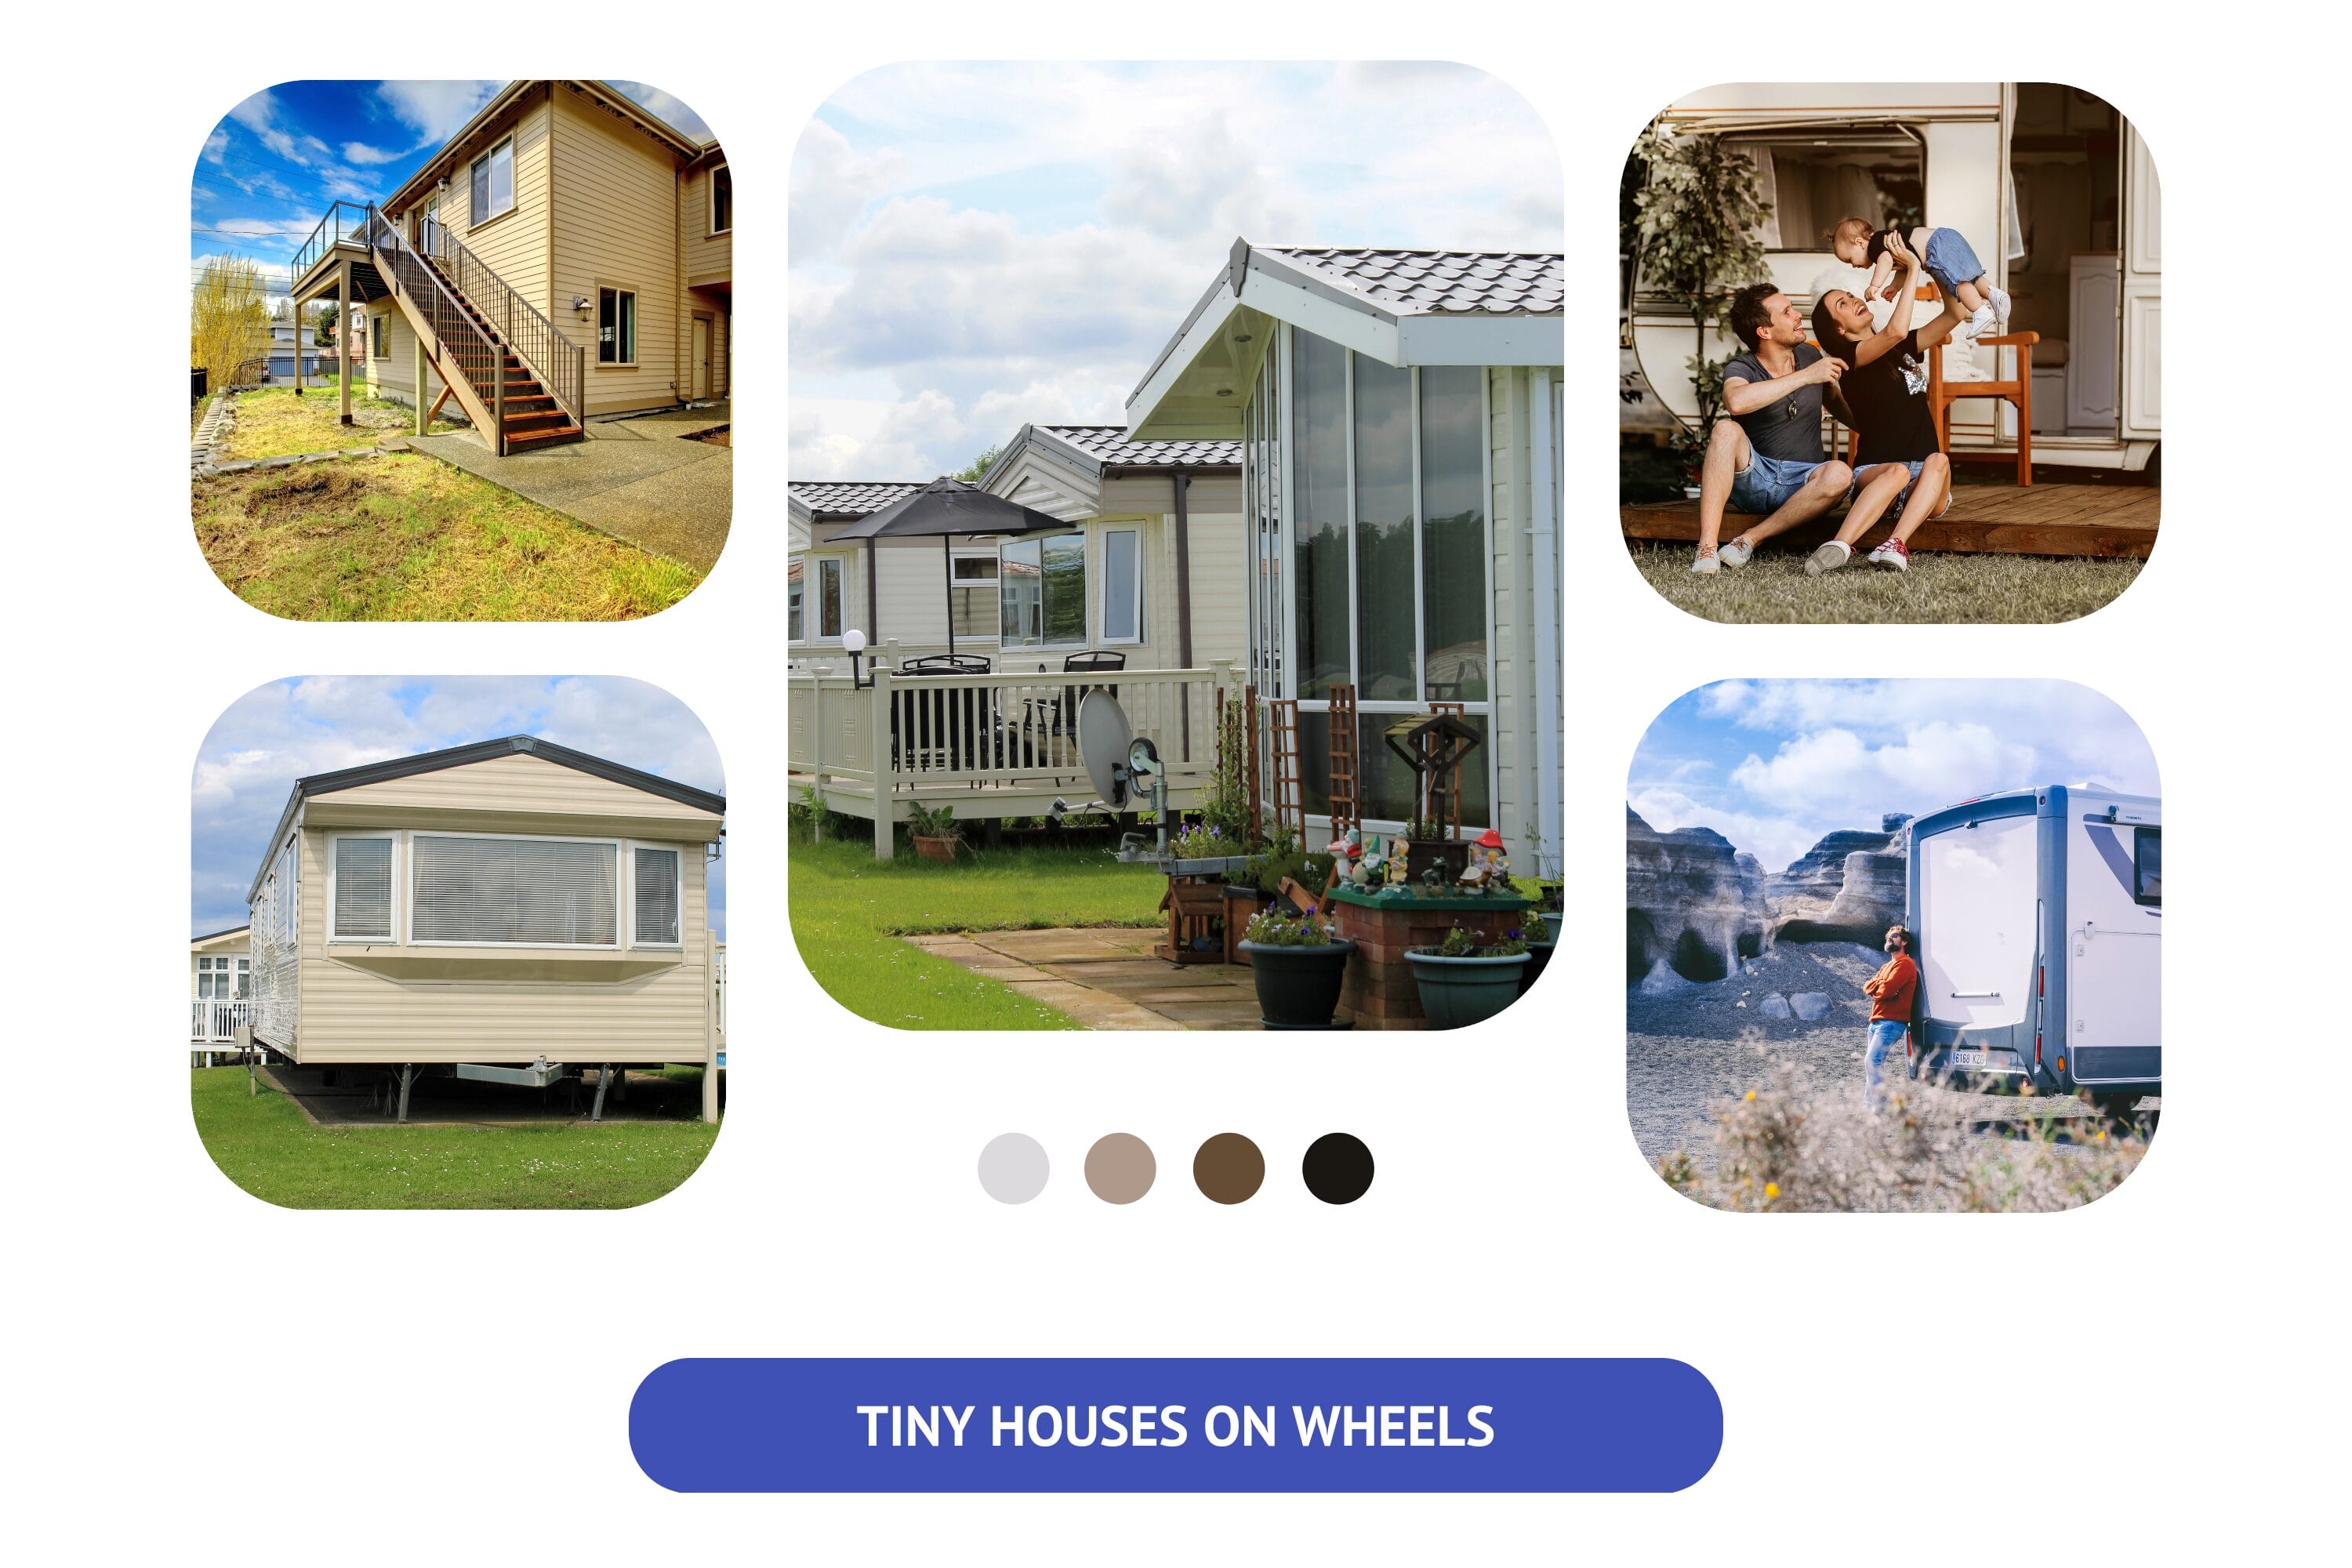 Could you explain the concept of Tiny Houses on Wheels?